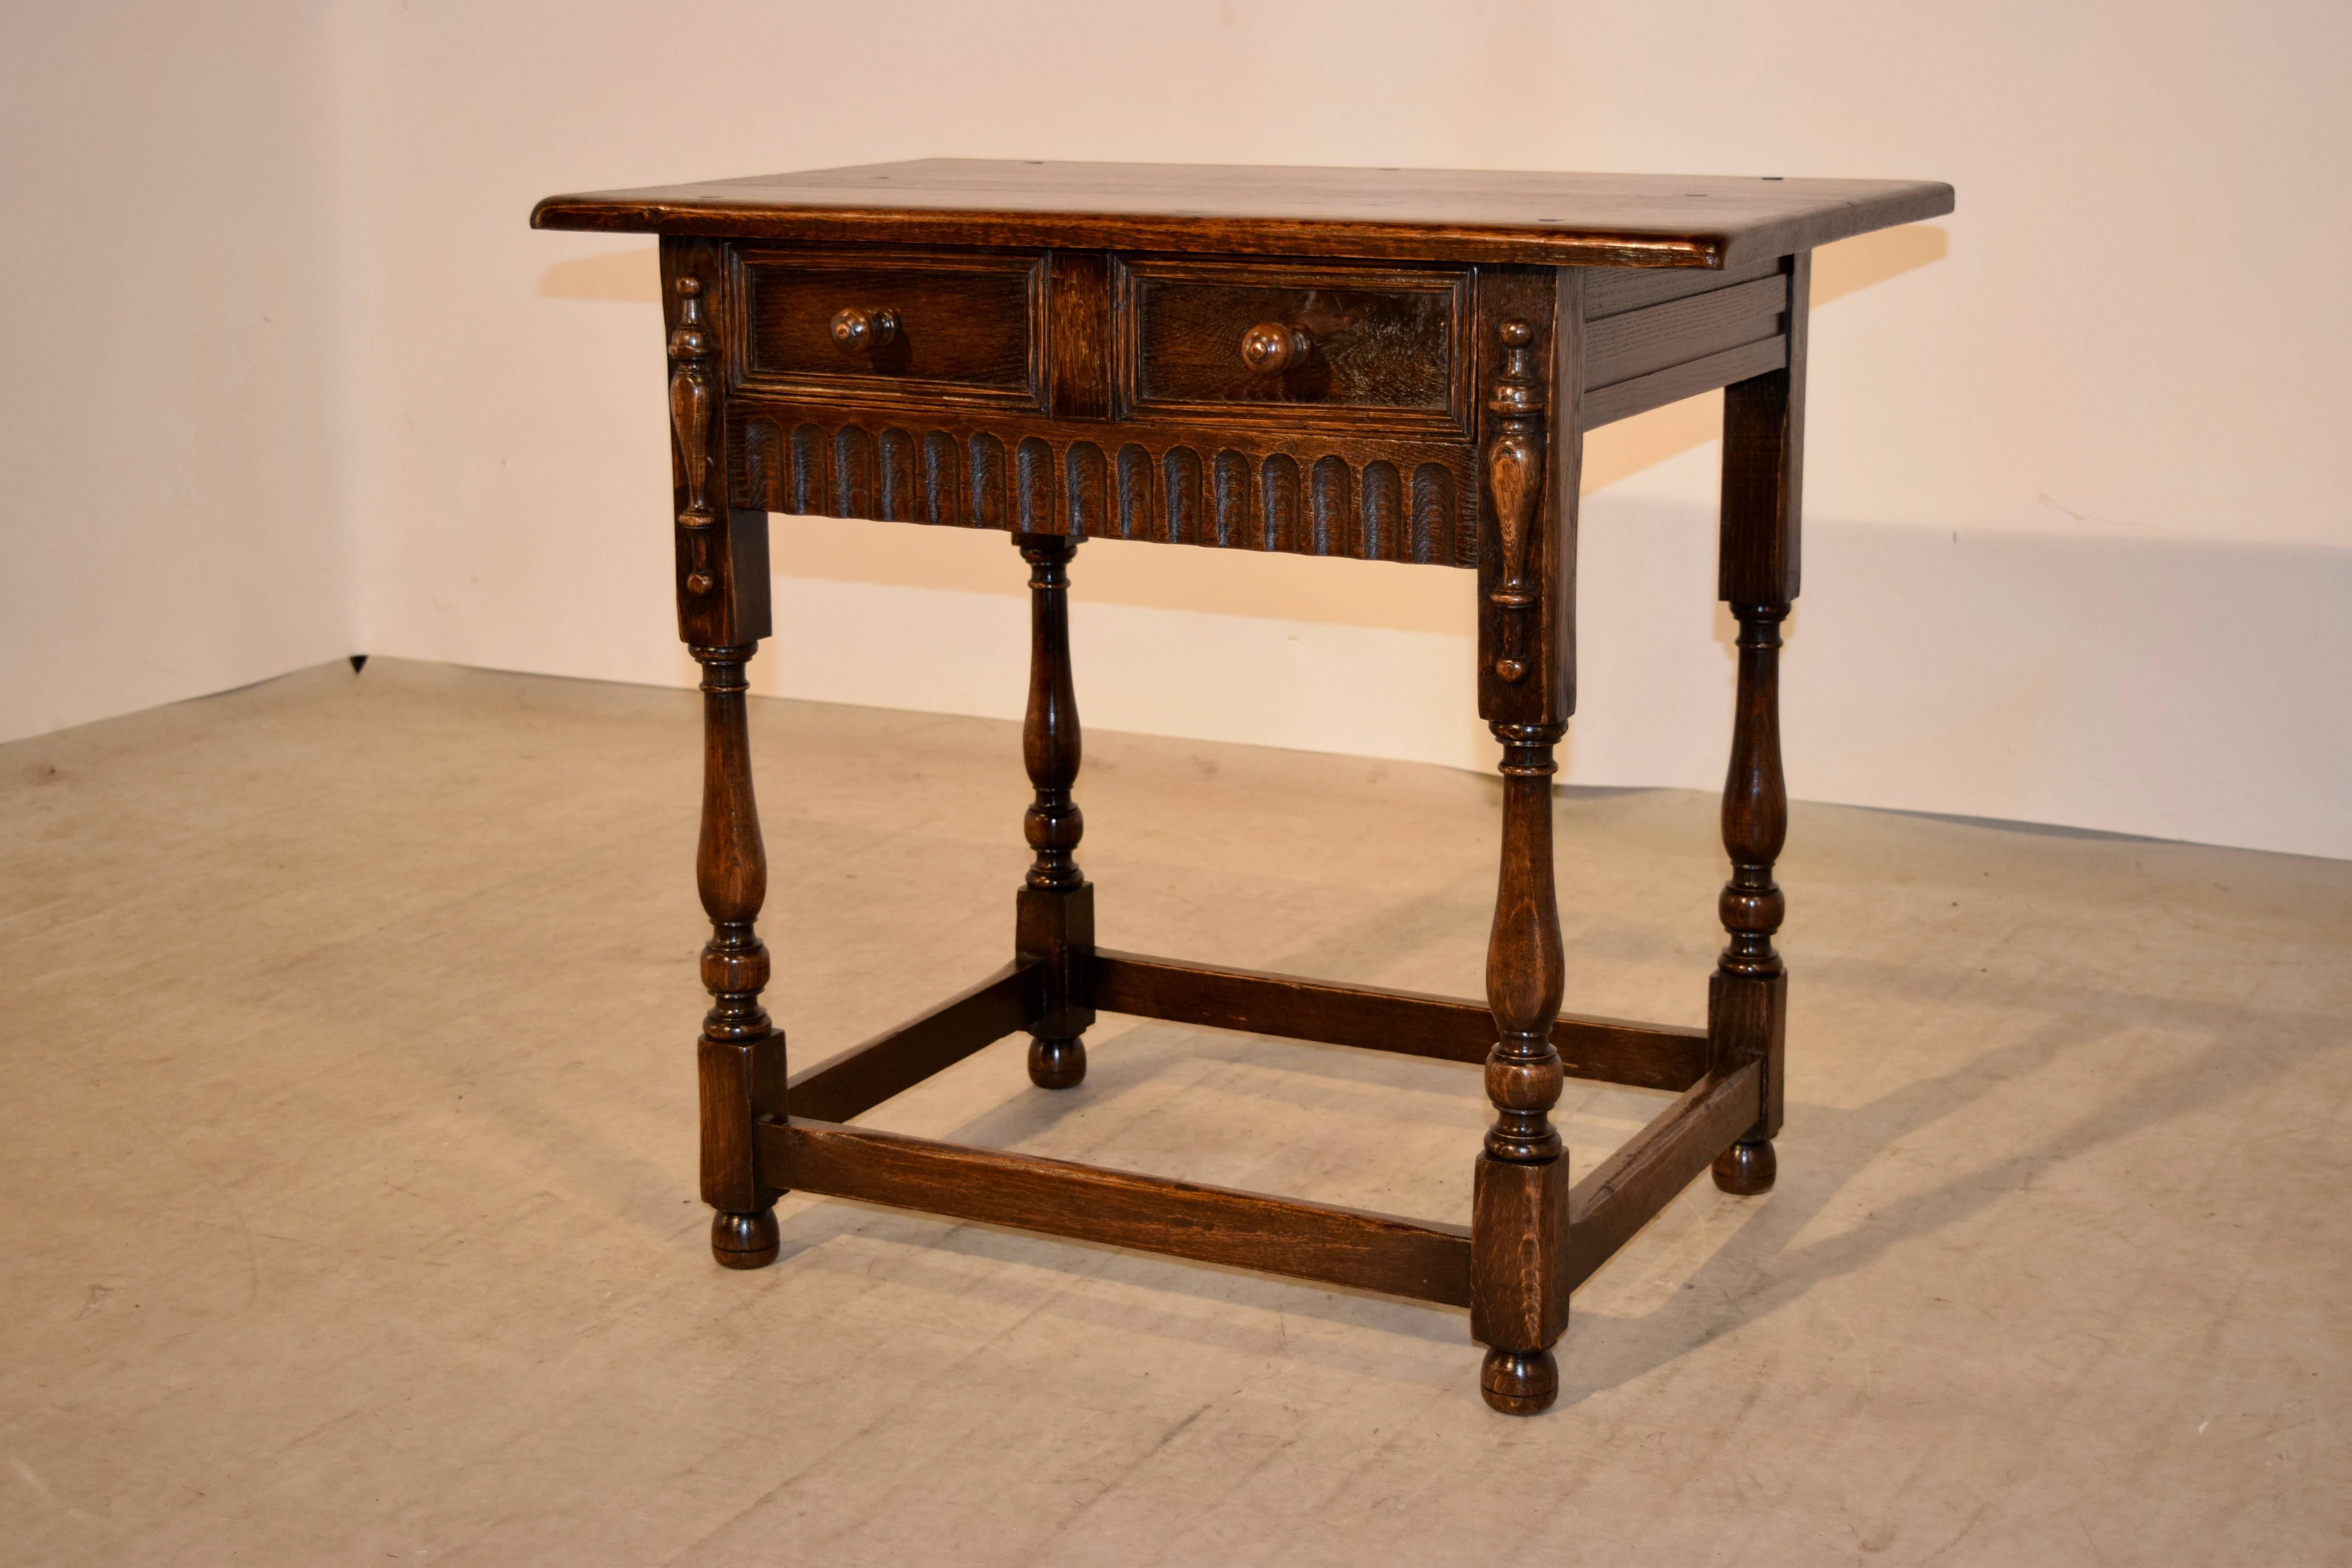 19th century English oak side table with a thick tow board top with pegged construction, following down to panelled sides and a single drawer in the front, also with raised panels on the drawer front. The drawer is flanked by applied half turnings